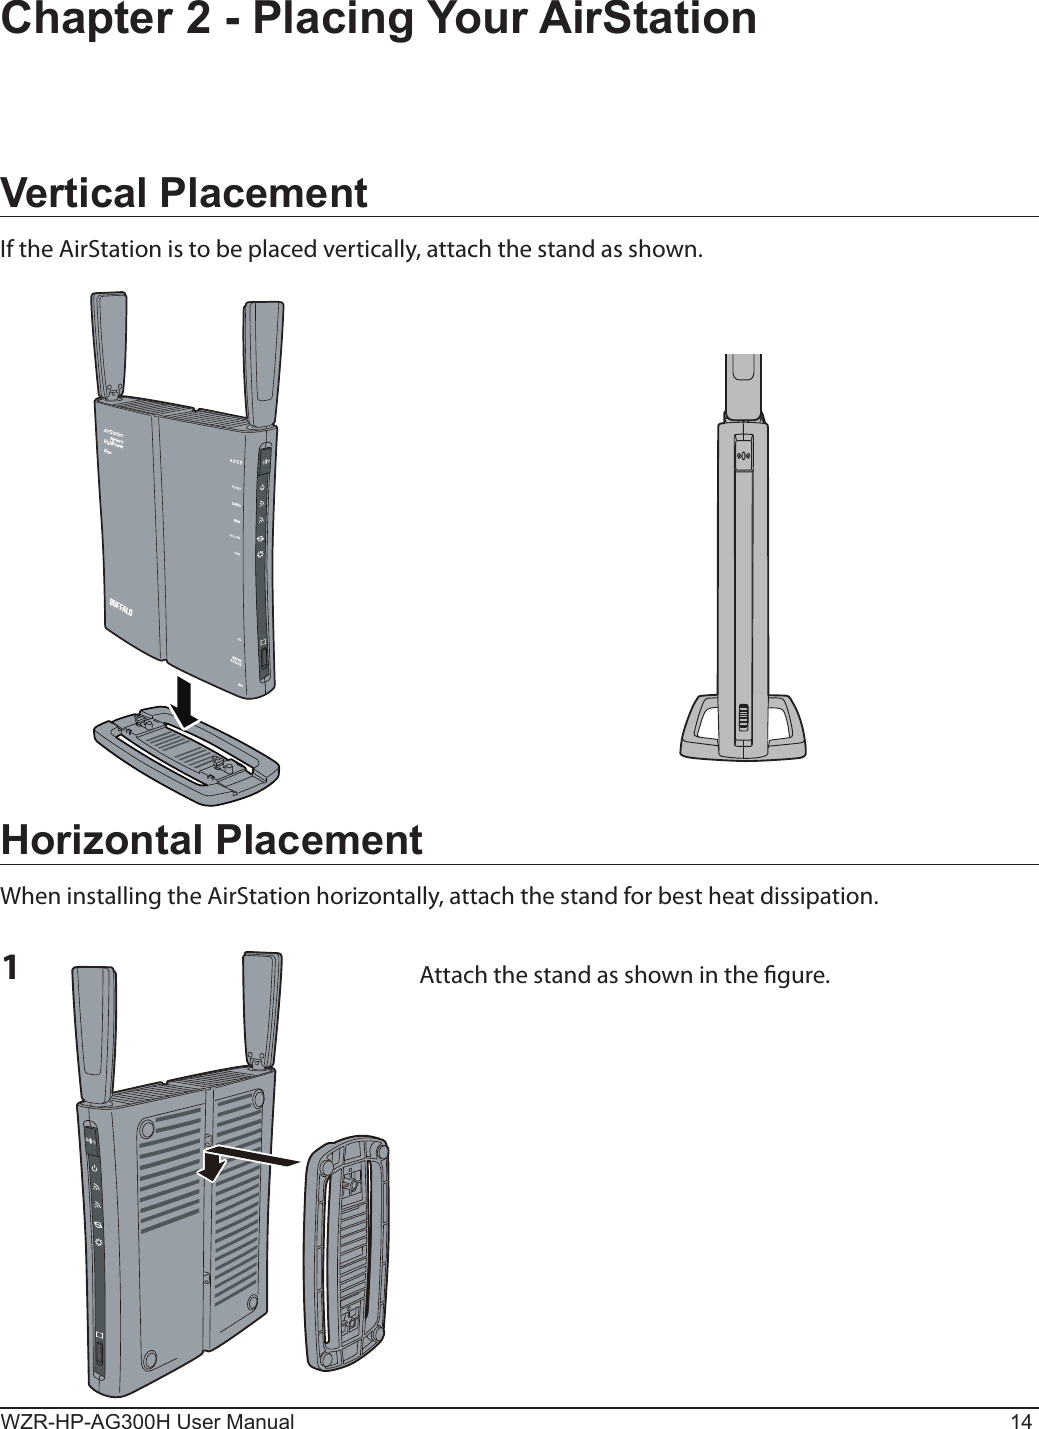 WZR-HP-AG300H User Manual 14Chapter 2 - Placing Your AirStationVertical PlacementIf the AirStation is to be placed vertically, attach the stand as shown.Horizontal PlacementWhen installing the AirStation horizontally, attach the stand for best heat dissipation.1Attach the stand as shown in the gure.